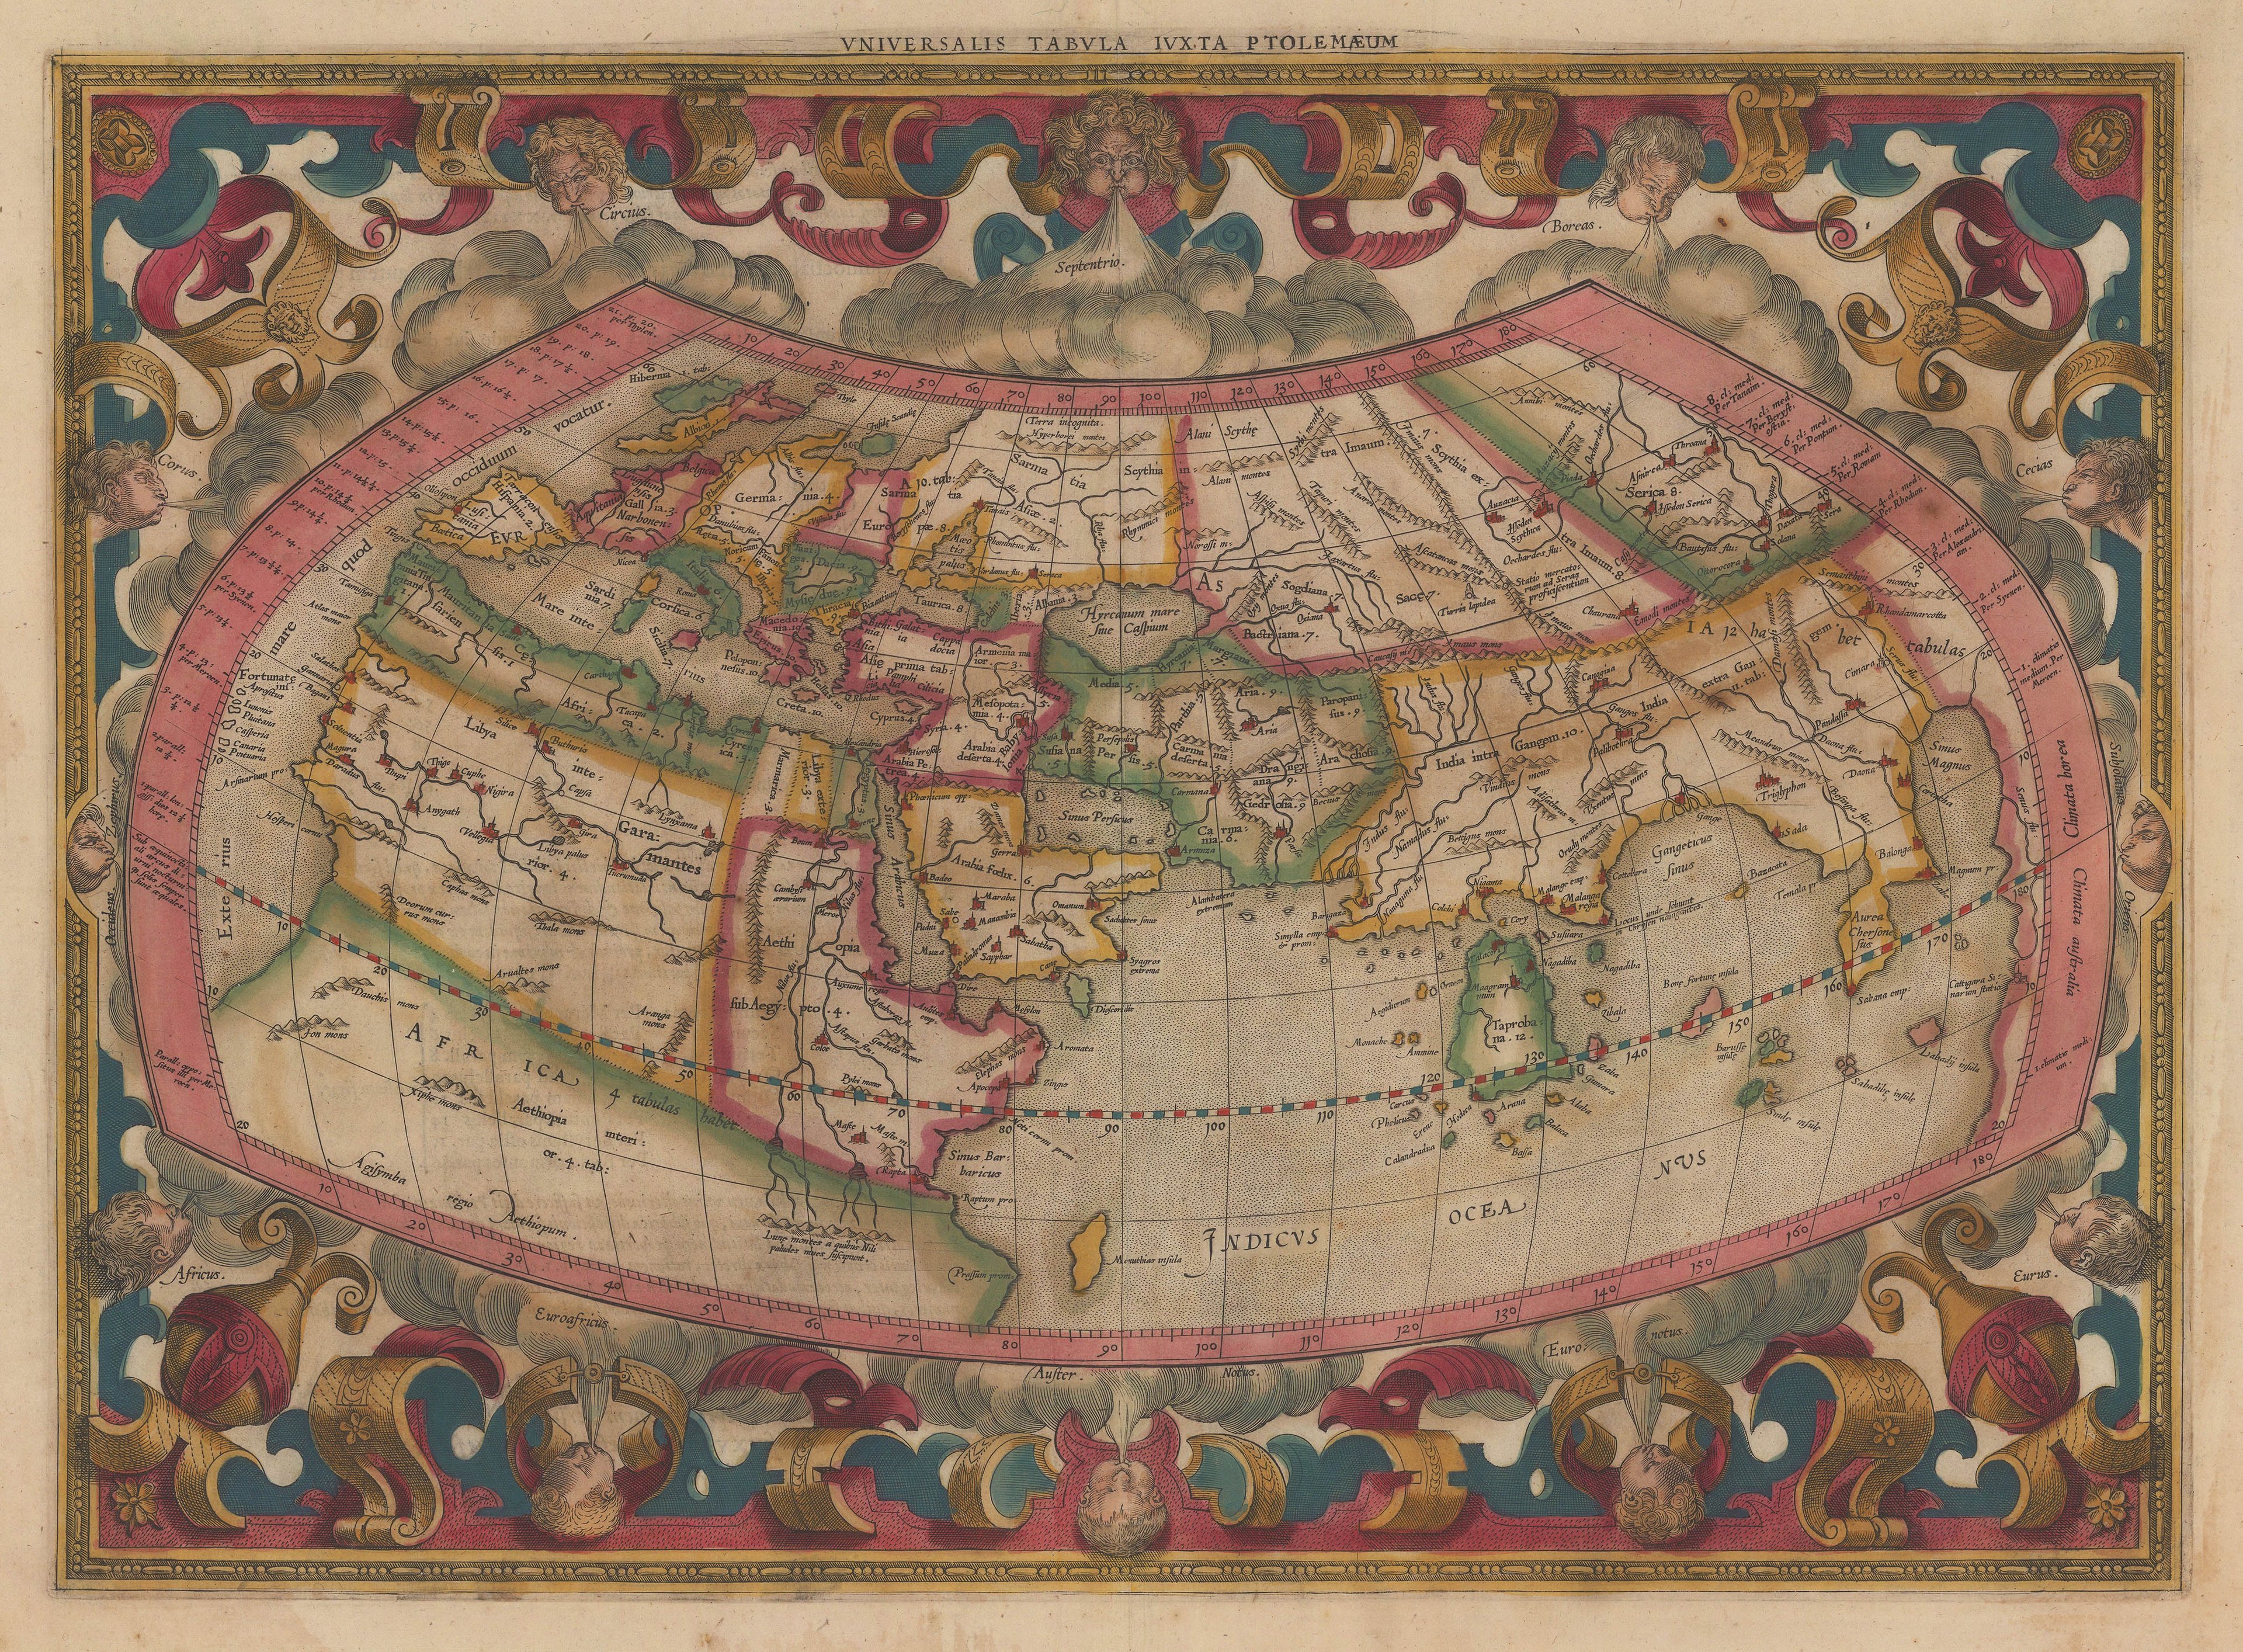 Colourful Ptolemaic World Map with ornate illustrations of 12 Windheads around the outside of the map